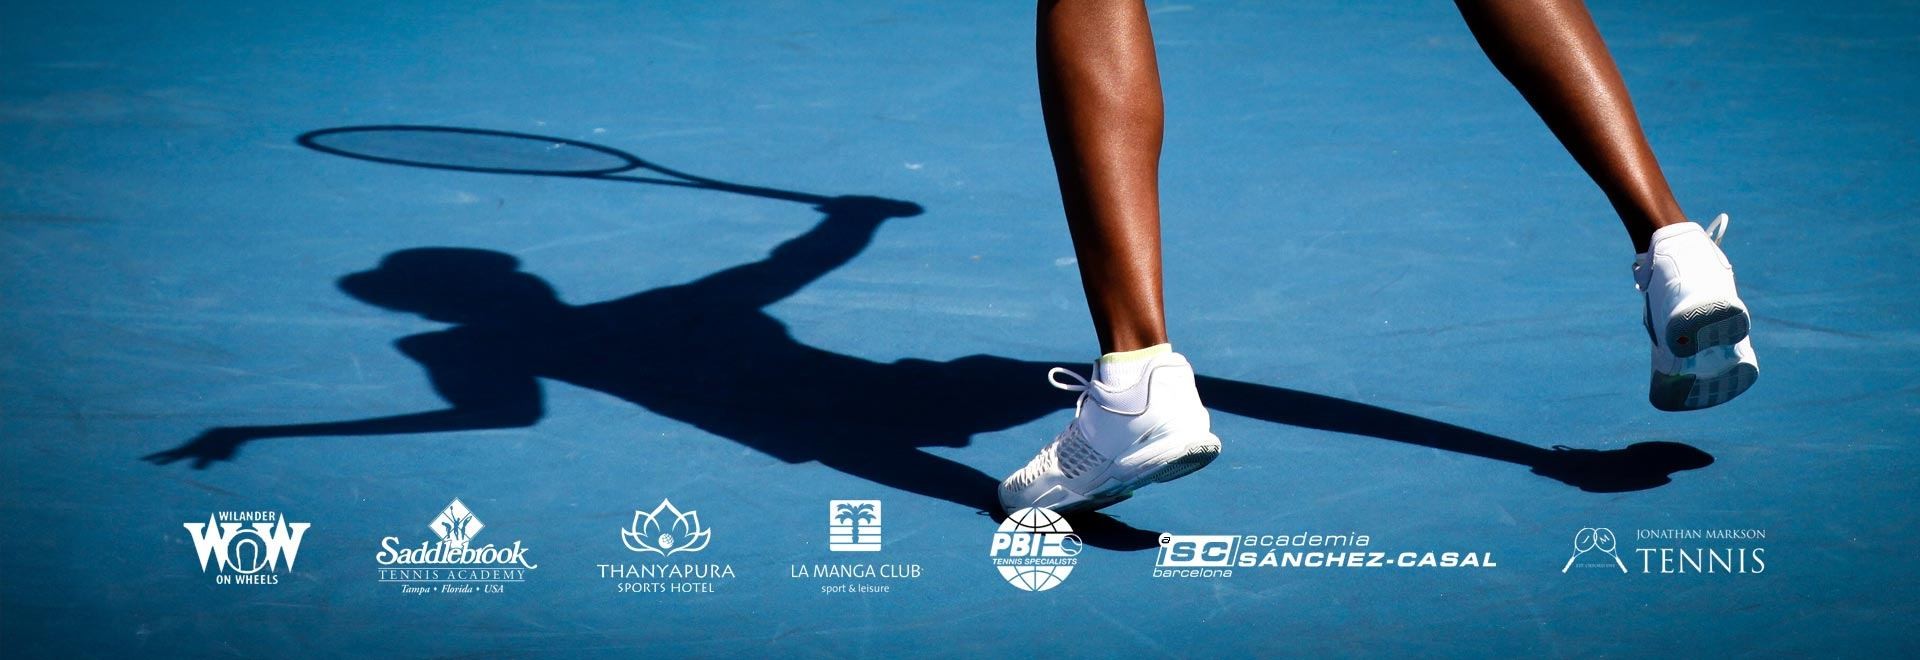 Join the World Tennis Travel family - List your tennis resort, academy, camp or event